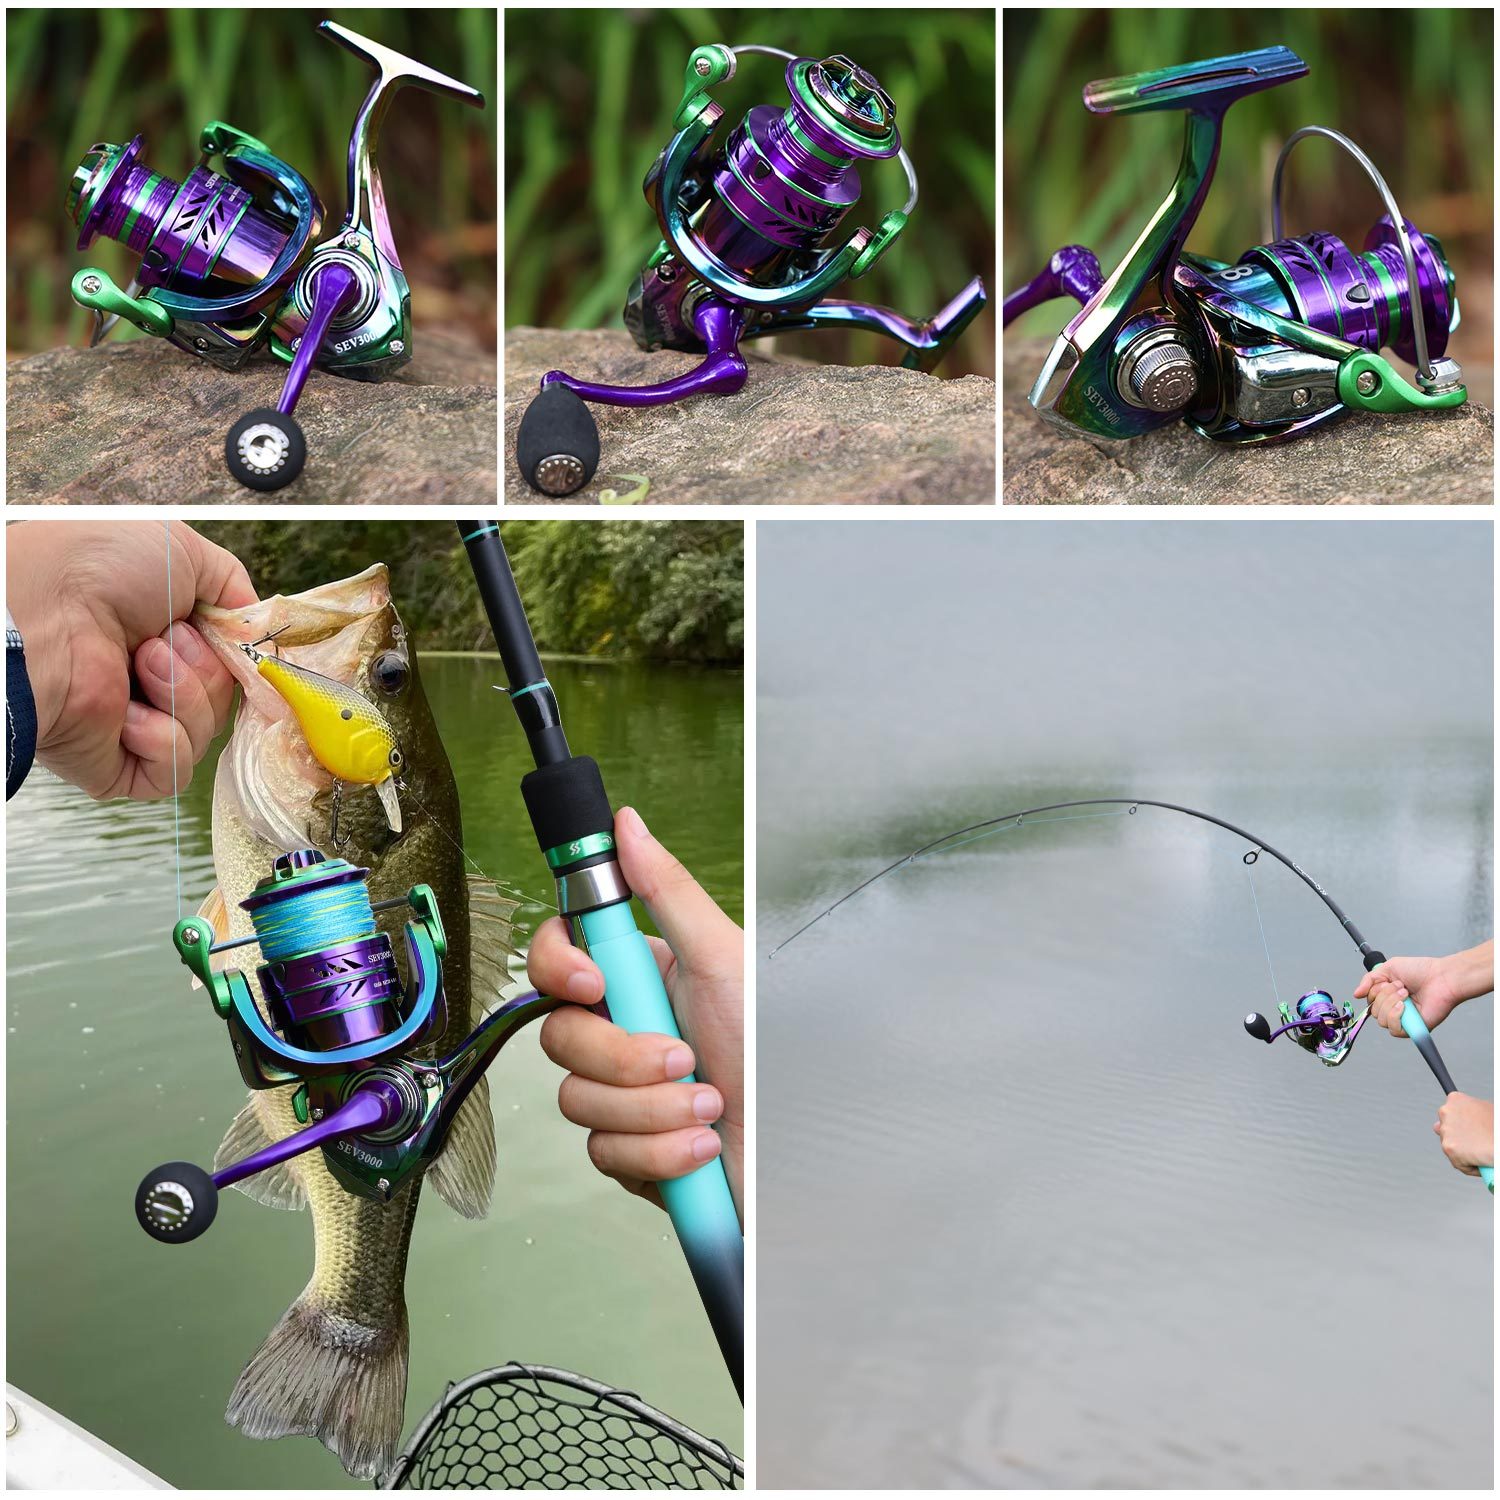  Sougayilang Fishing Reel, Colorful Ultralight Spinning Reels  with Graphite Frame 6.0:1 High Speed, Over 39 lbs Carbon Drag for Saltwater  or Freshwater Fishing- SC1000 : Sports & Outdoors